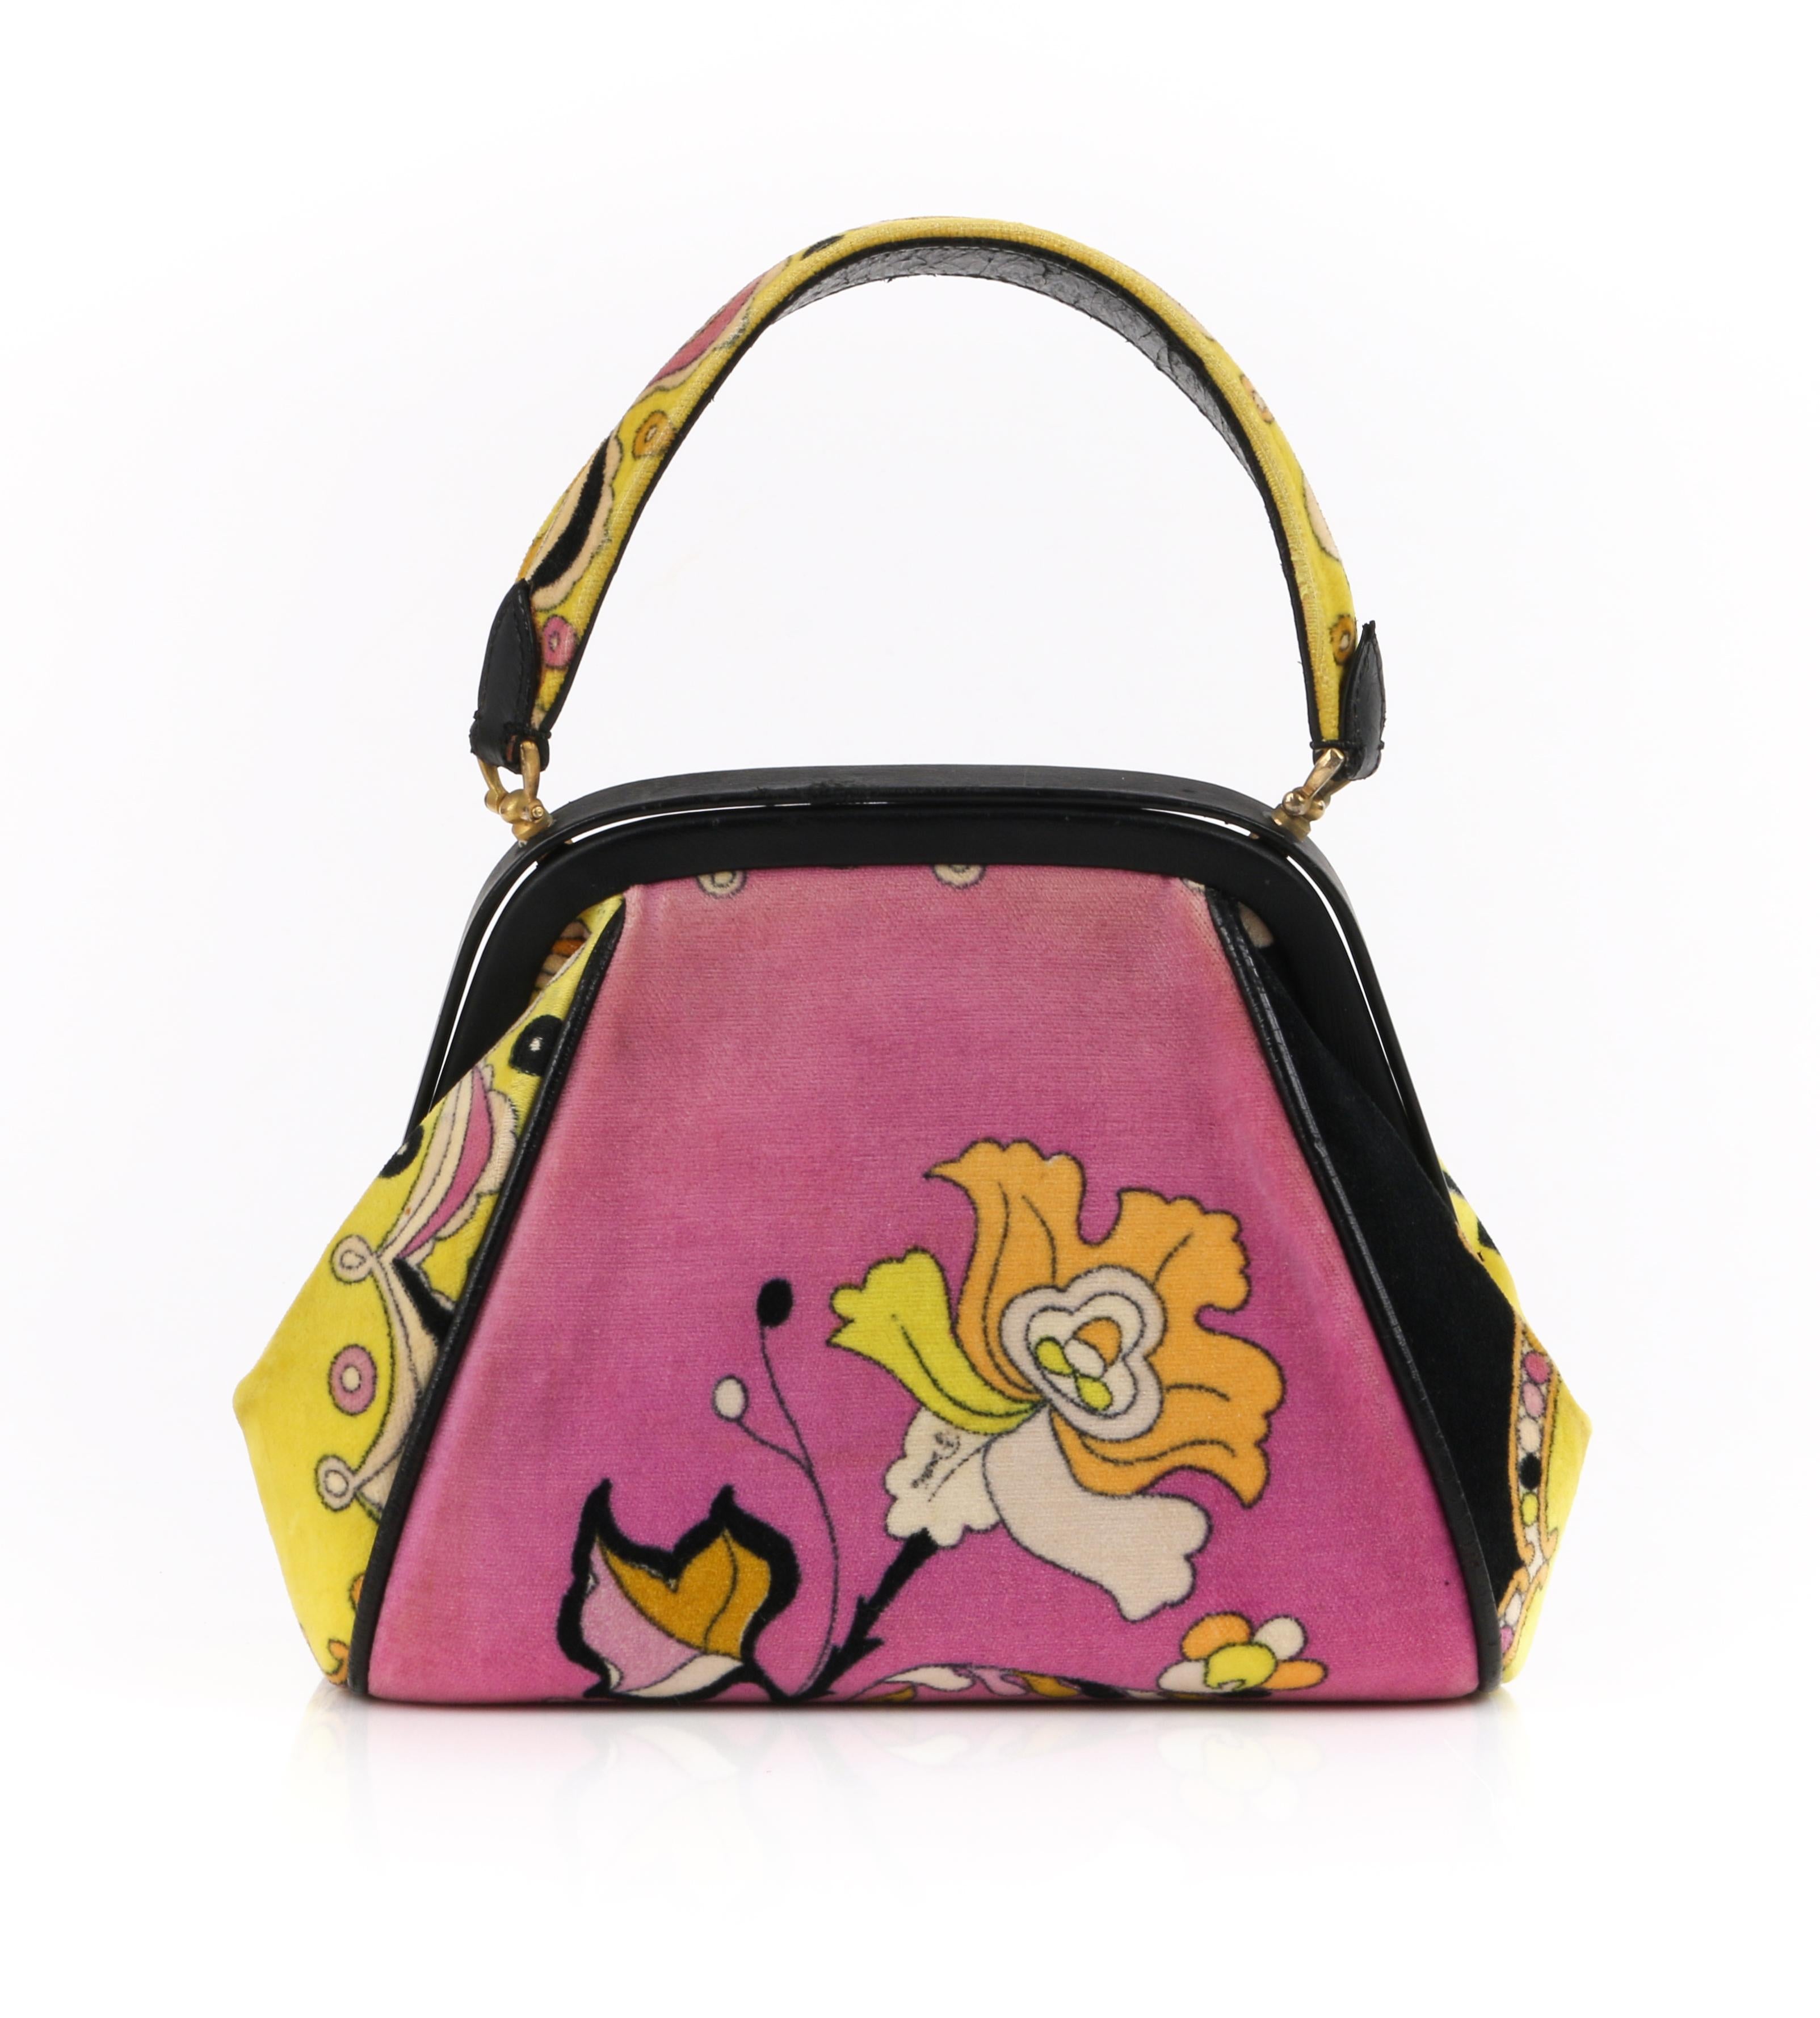 EMILIO PUCCI by Jana c.1960s Floral Signature Print Velveteen Structured Handbag
 
Circa: 1960s
Label(s): Emilio Pucci Bags by Jana
Designer: Emilio Pucci
Style: Handbag
Color(s): Shades of pink, yellow, white, black
Lined: Yes
Unmarked Fabric